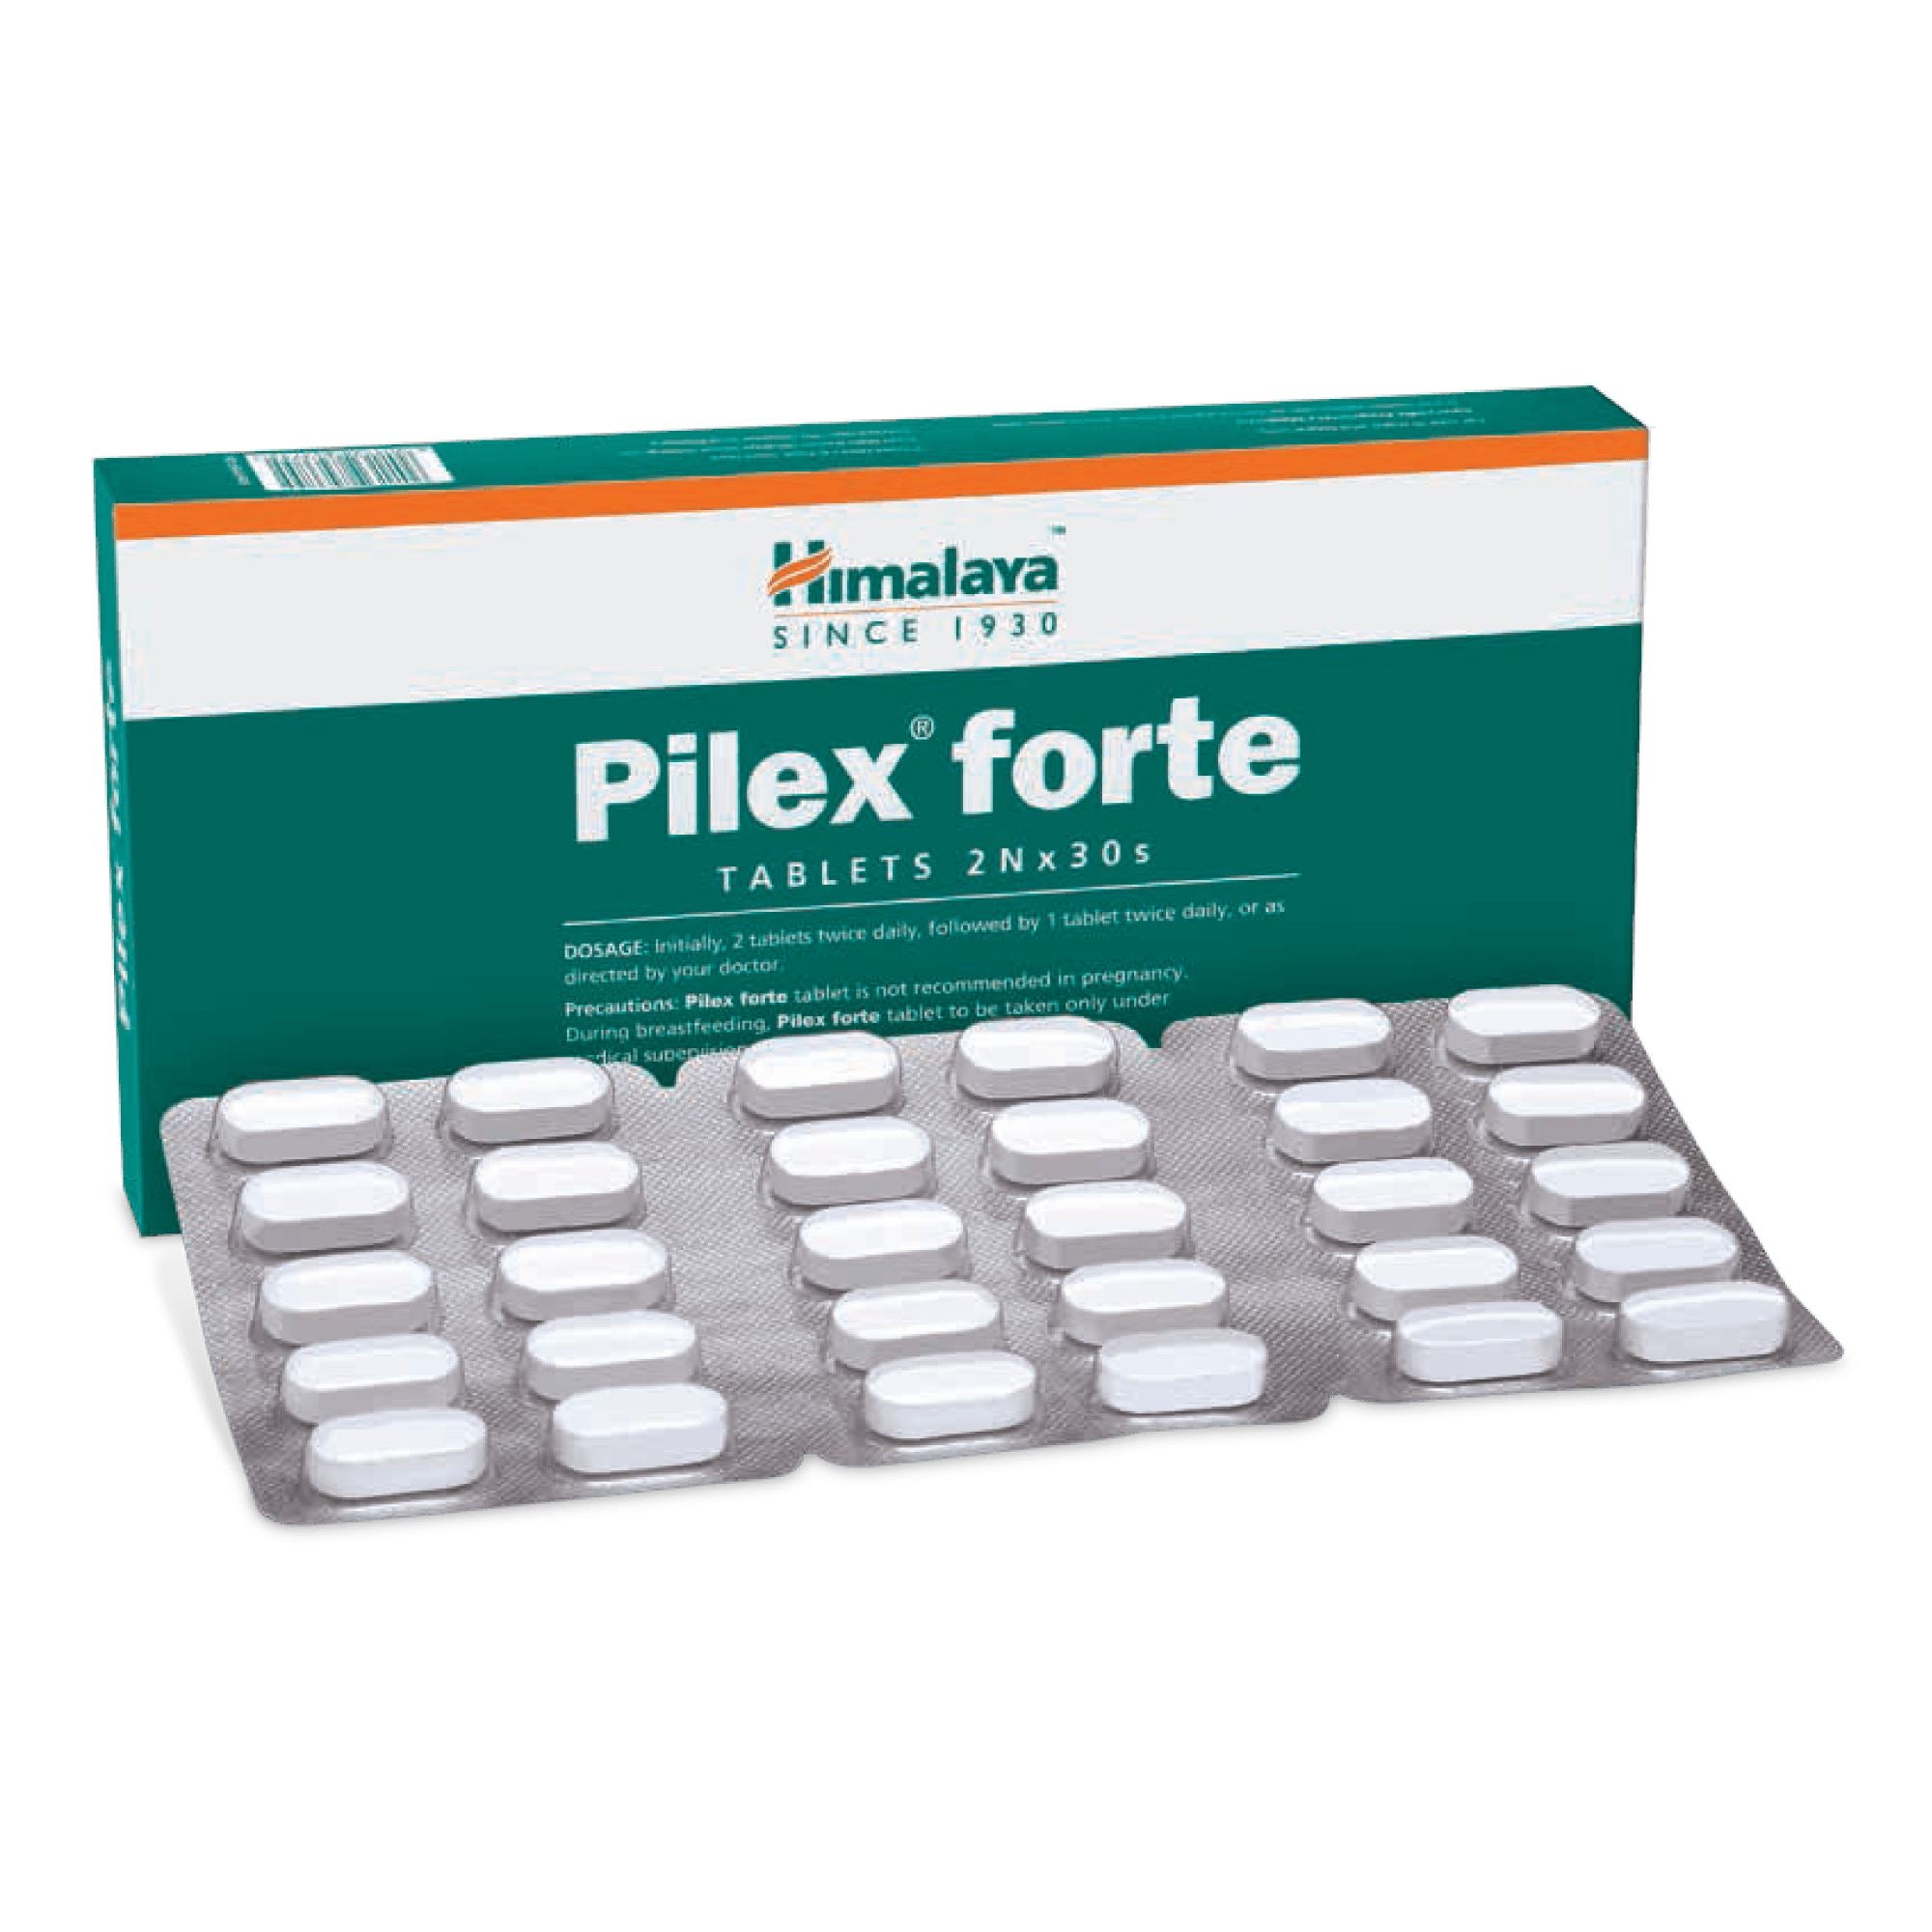 Himalaya Pilex forte tablet - Helps recover from fissure-in-ano and post-hemorrhoidal surgery